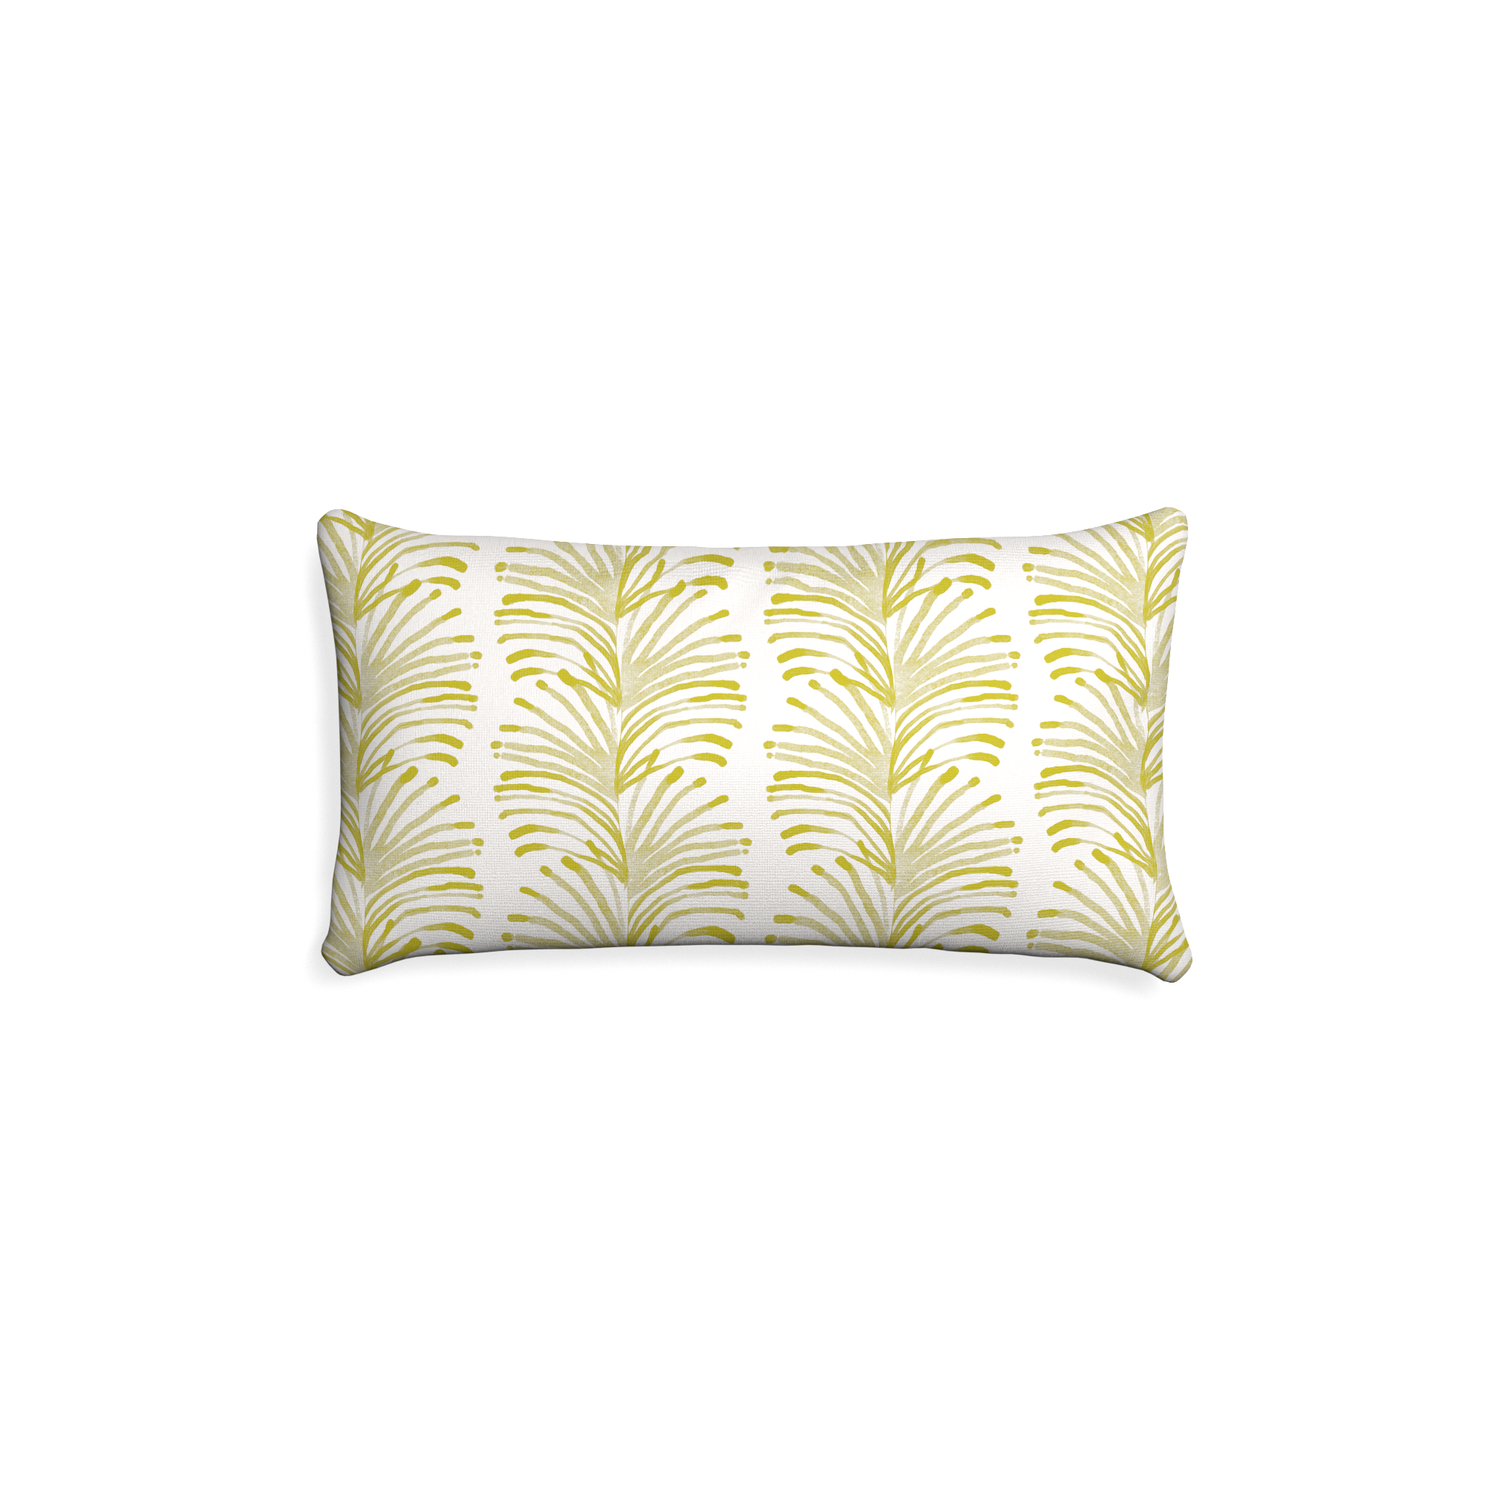 Petite-lumbar emma chartreuse custom yellow stripe chartreusepillow with none on white background